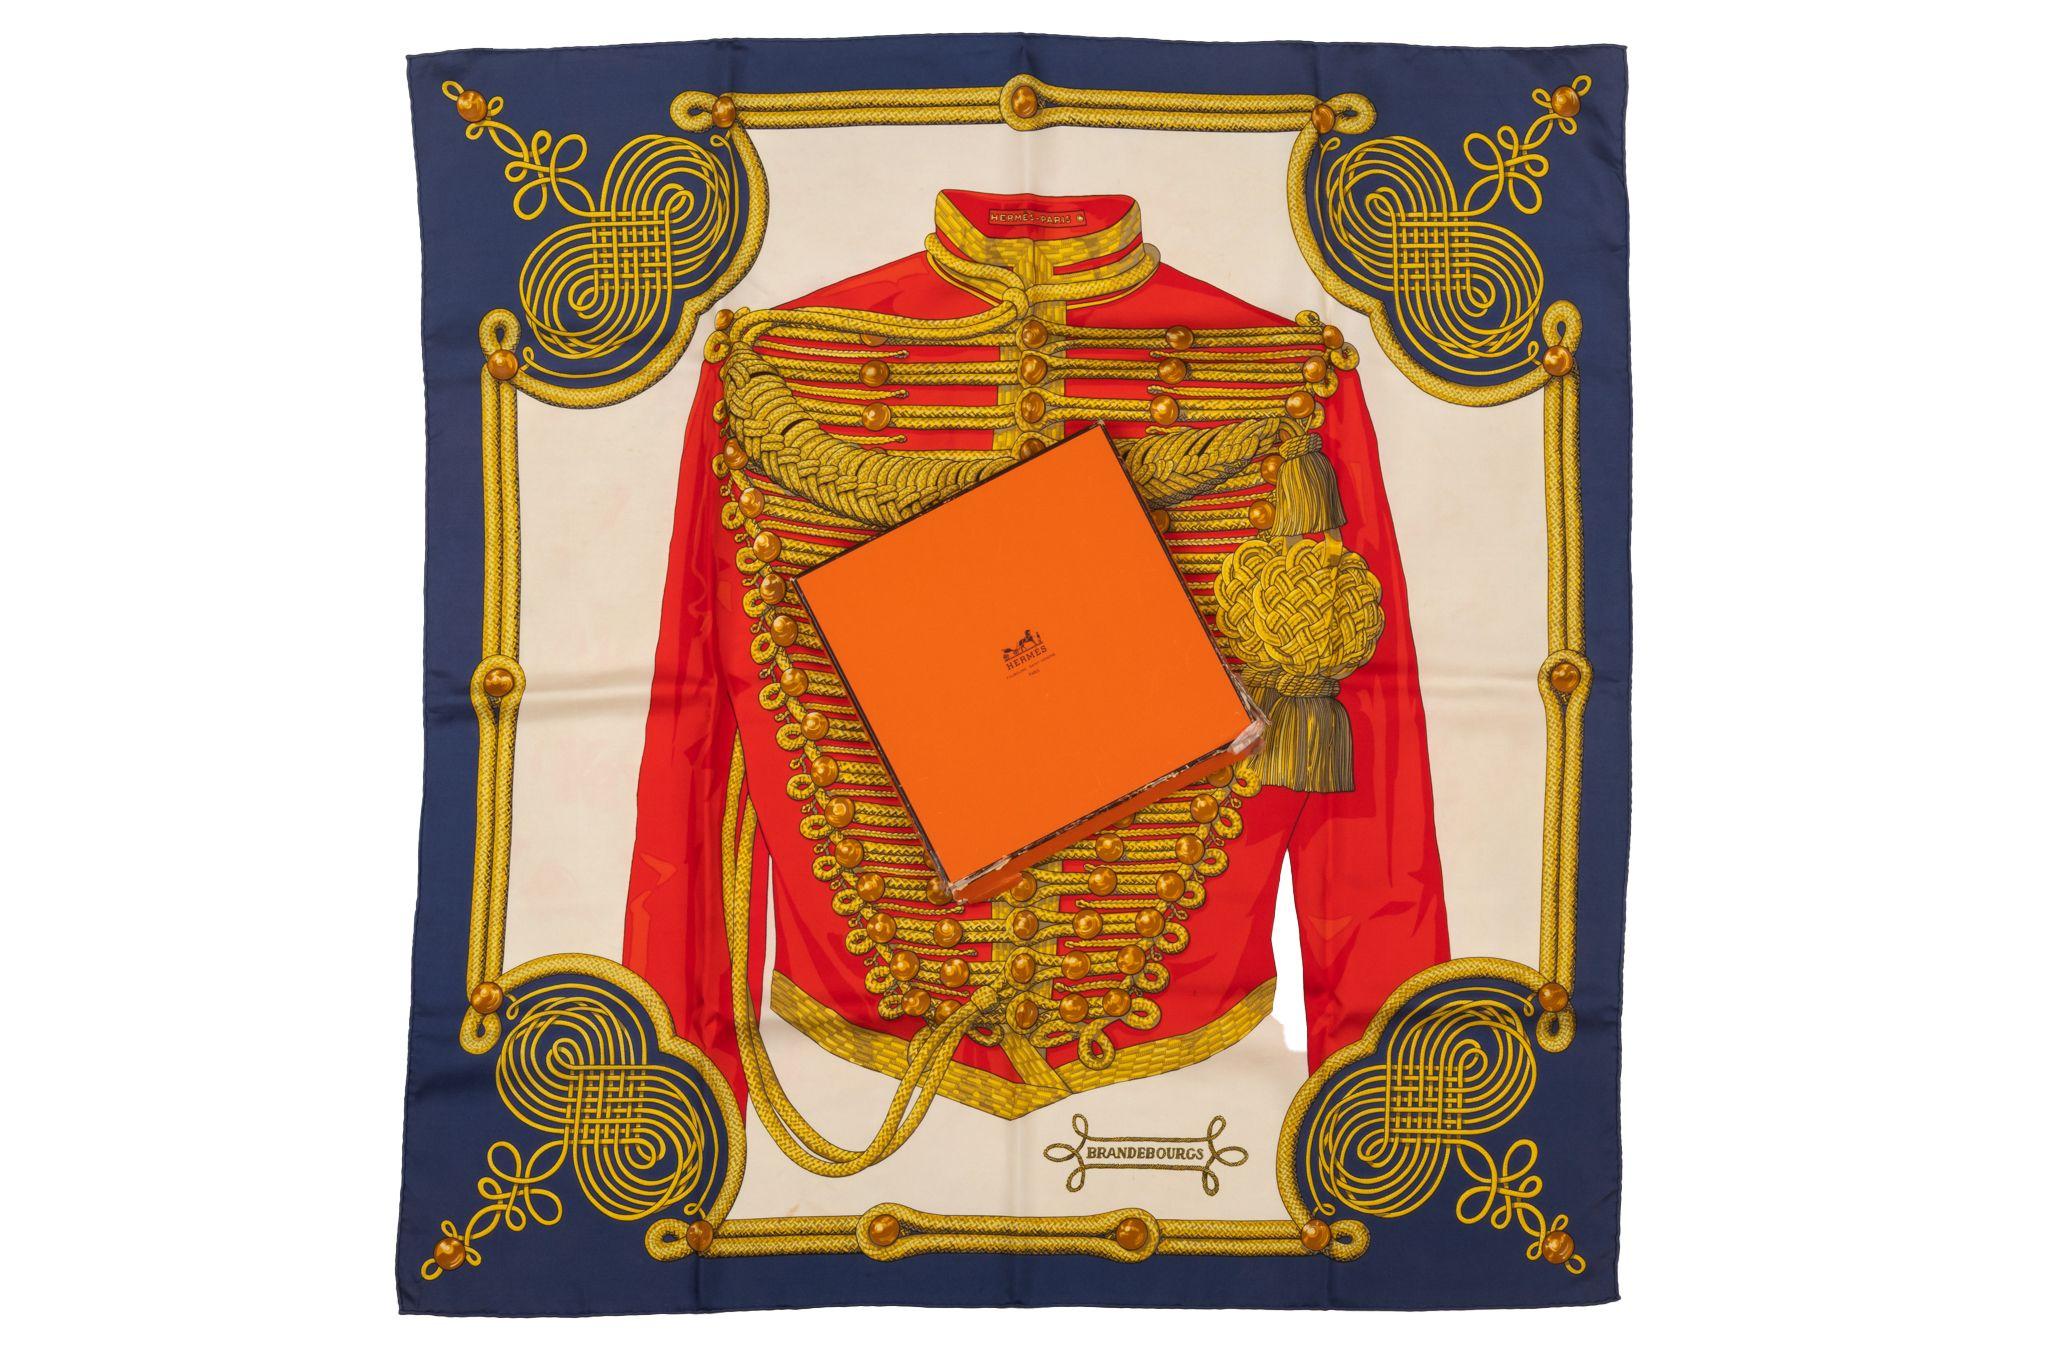 Hermès vintage silk twill rare Brandebourgs scarf designed by Caty Latham. Comes with the original box. Piece is pre-owned and has a stain. Please look at the pictures.